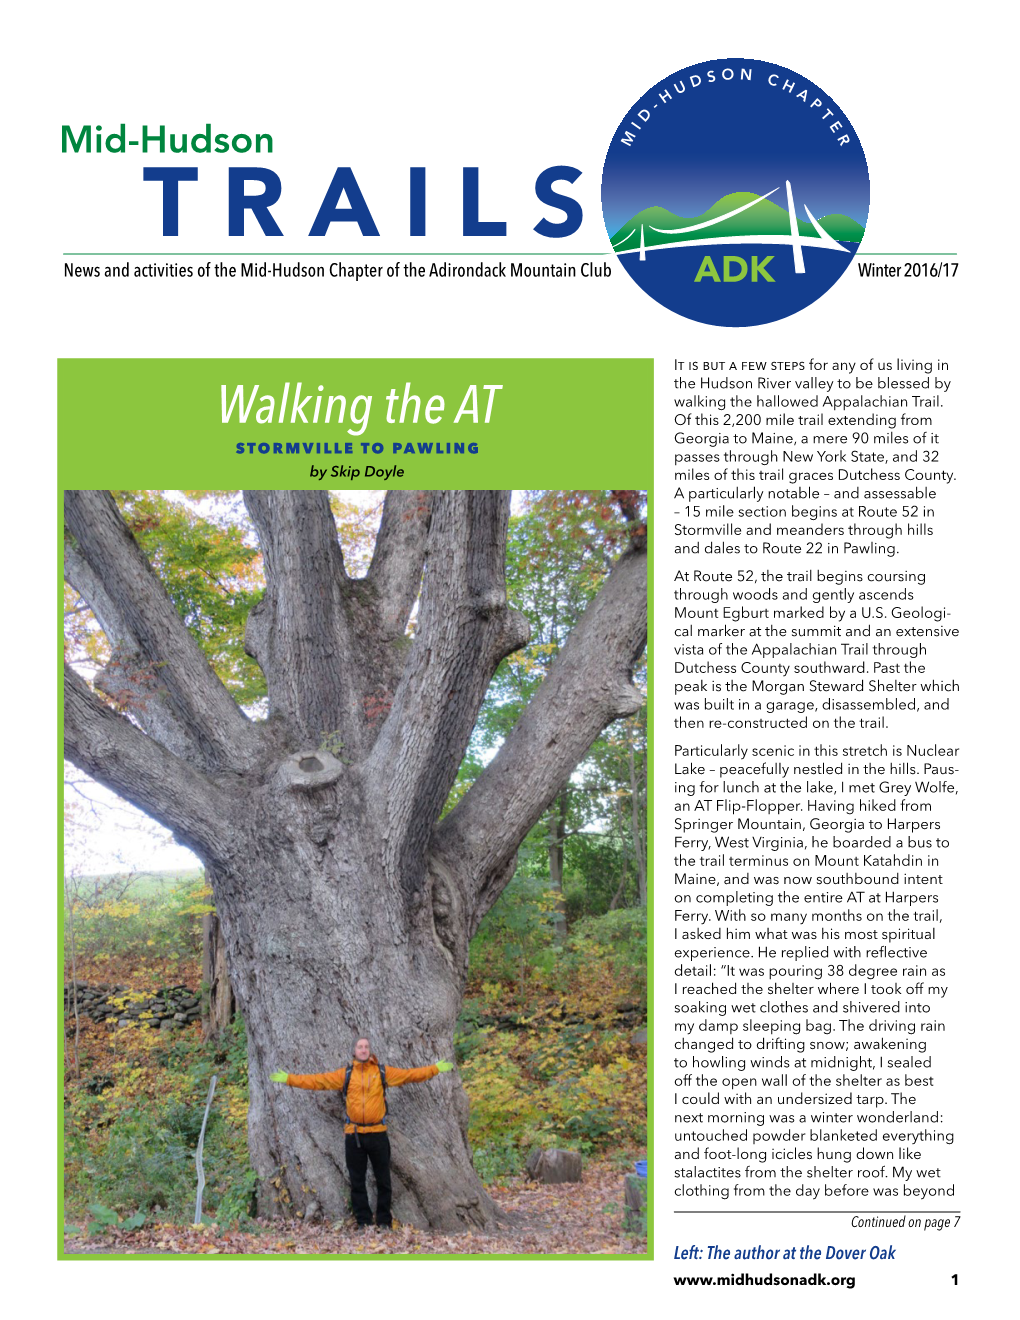 TRAILS of the Mid-Hudson Chapter of the Adirondack Mountain Club ADK Winter 2016/17